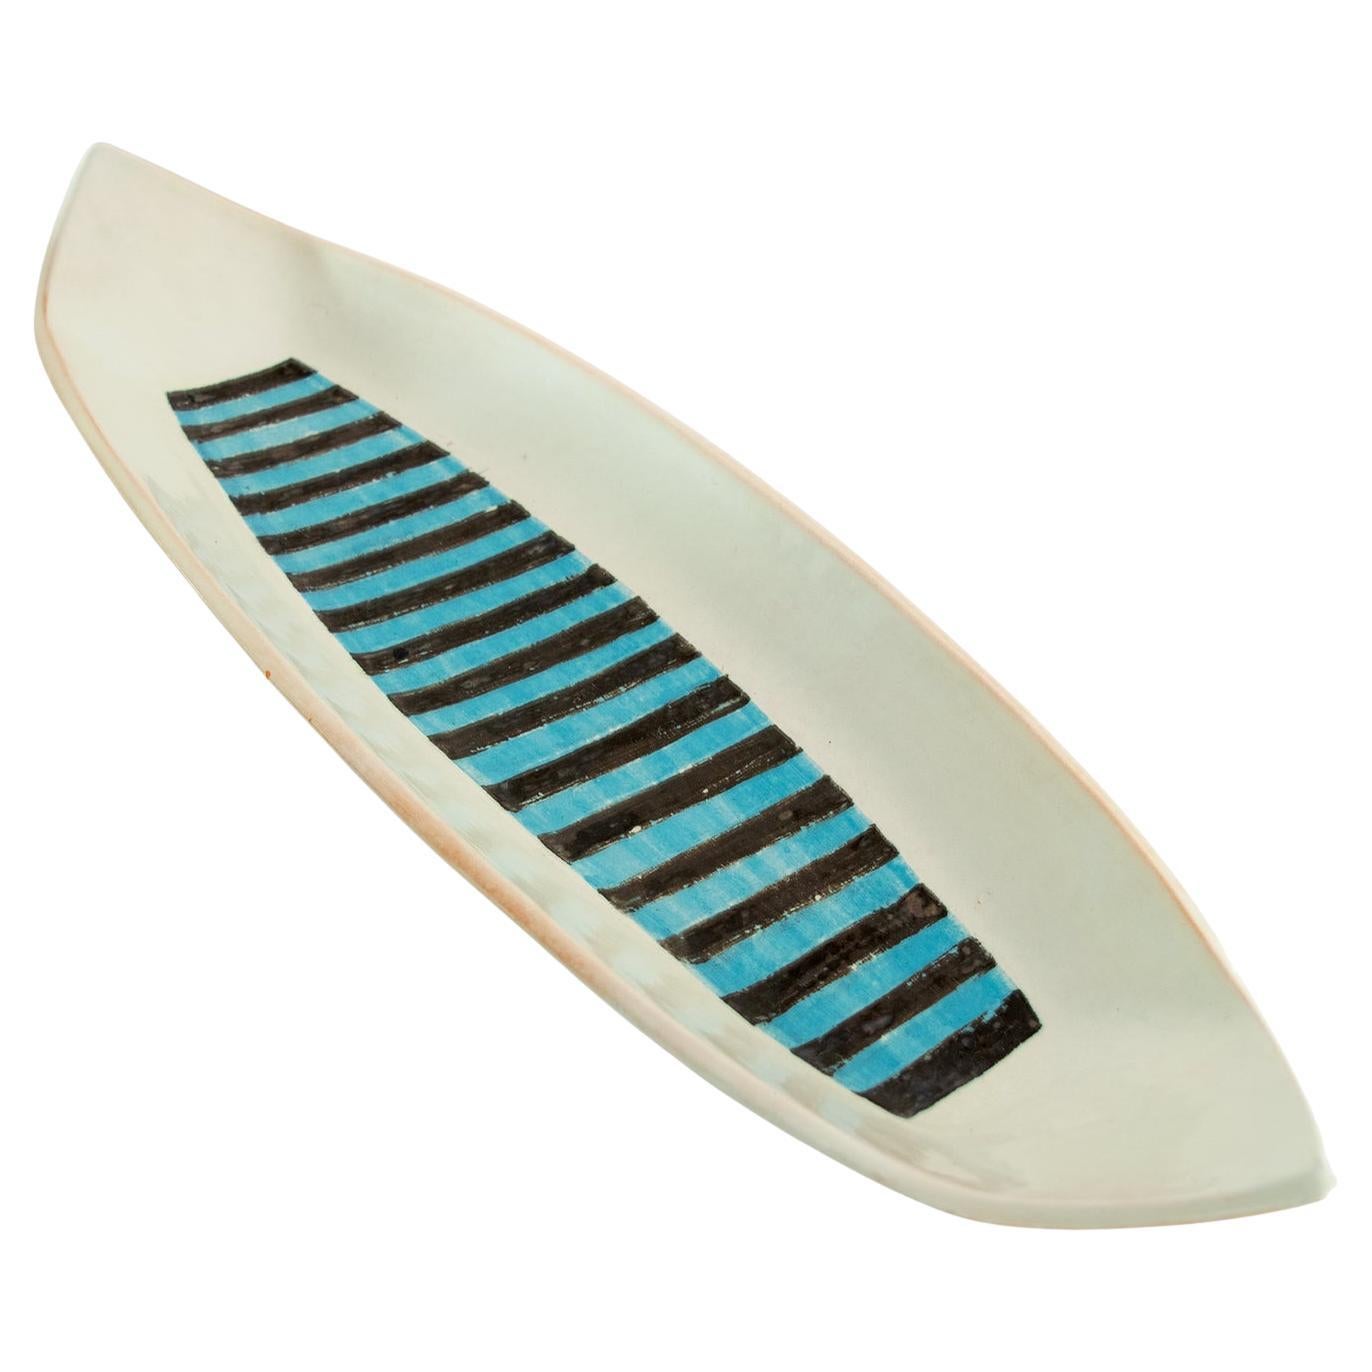 Carl-Harry Stalhane Painted Dish Rorstrand 'D' Sweden, 1950's For Sale